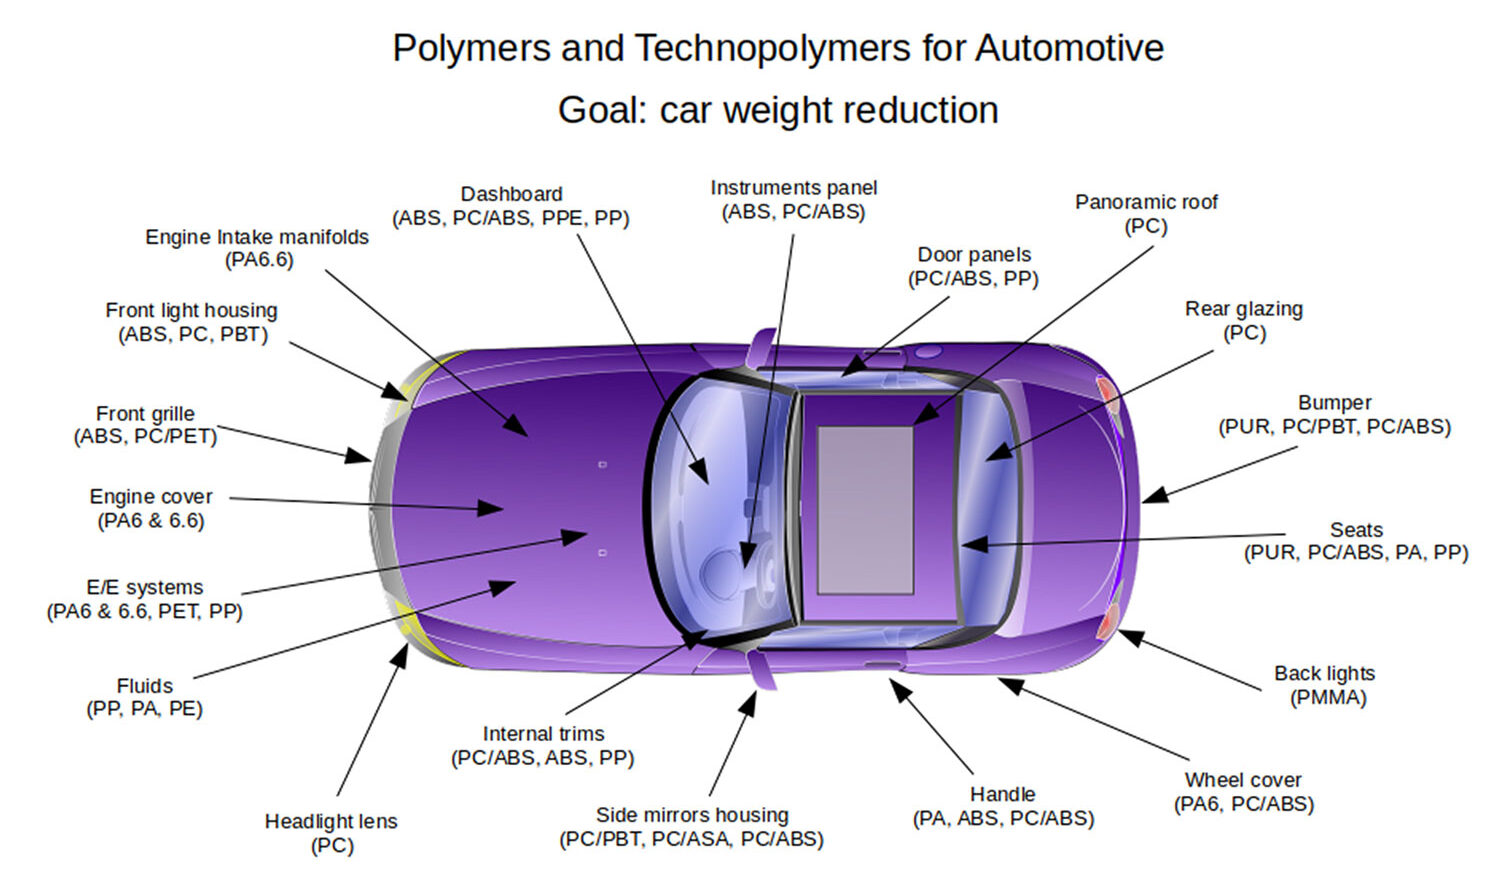 Polycarbonate applications in various parts of the cars